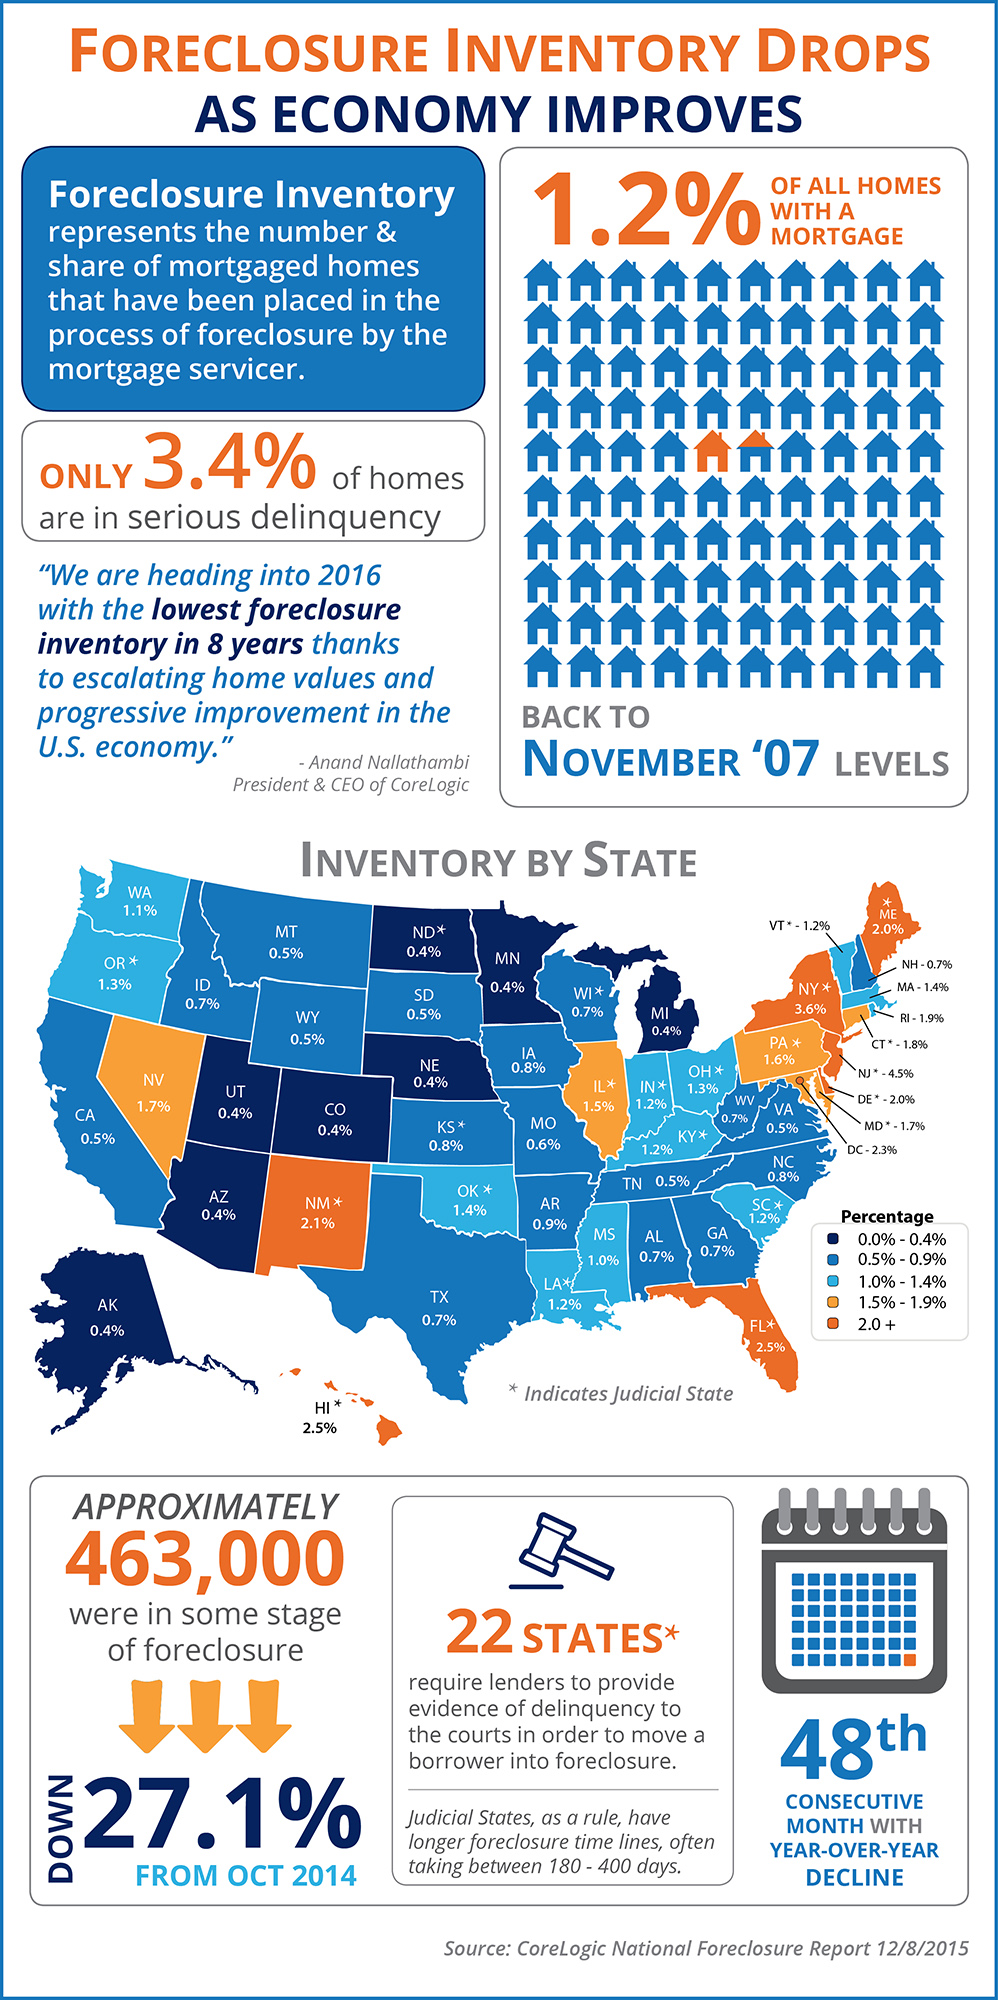 Foreclosure Inventory Drops As Economy Improves [INFOGRAPHIC] | Simplifying The Market